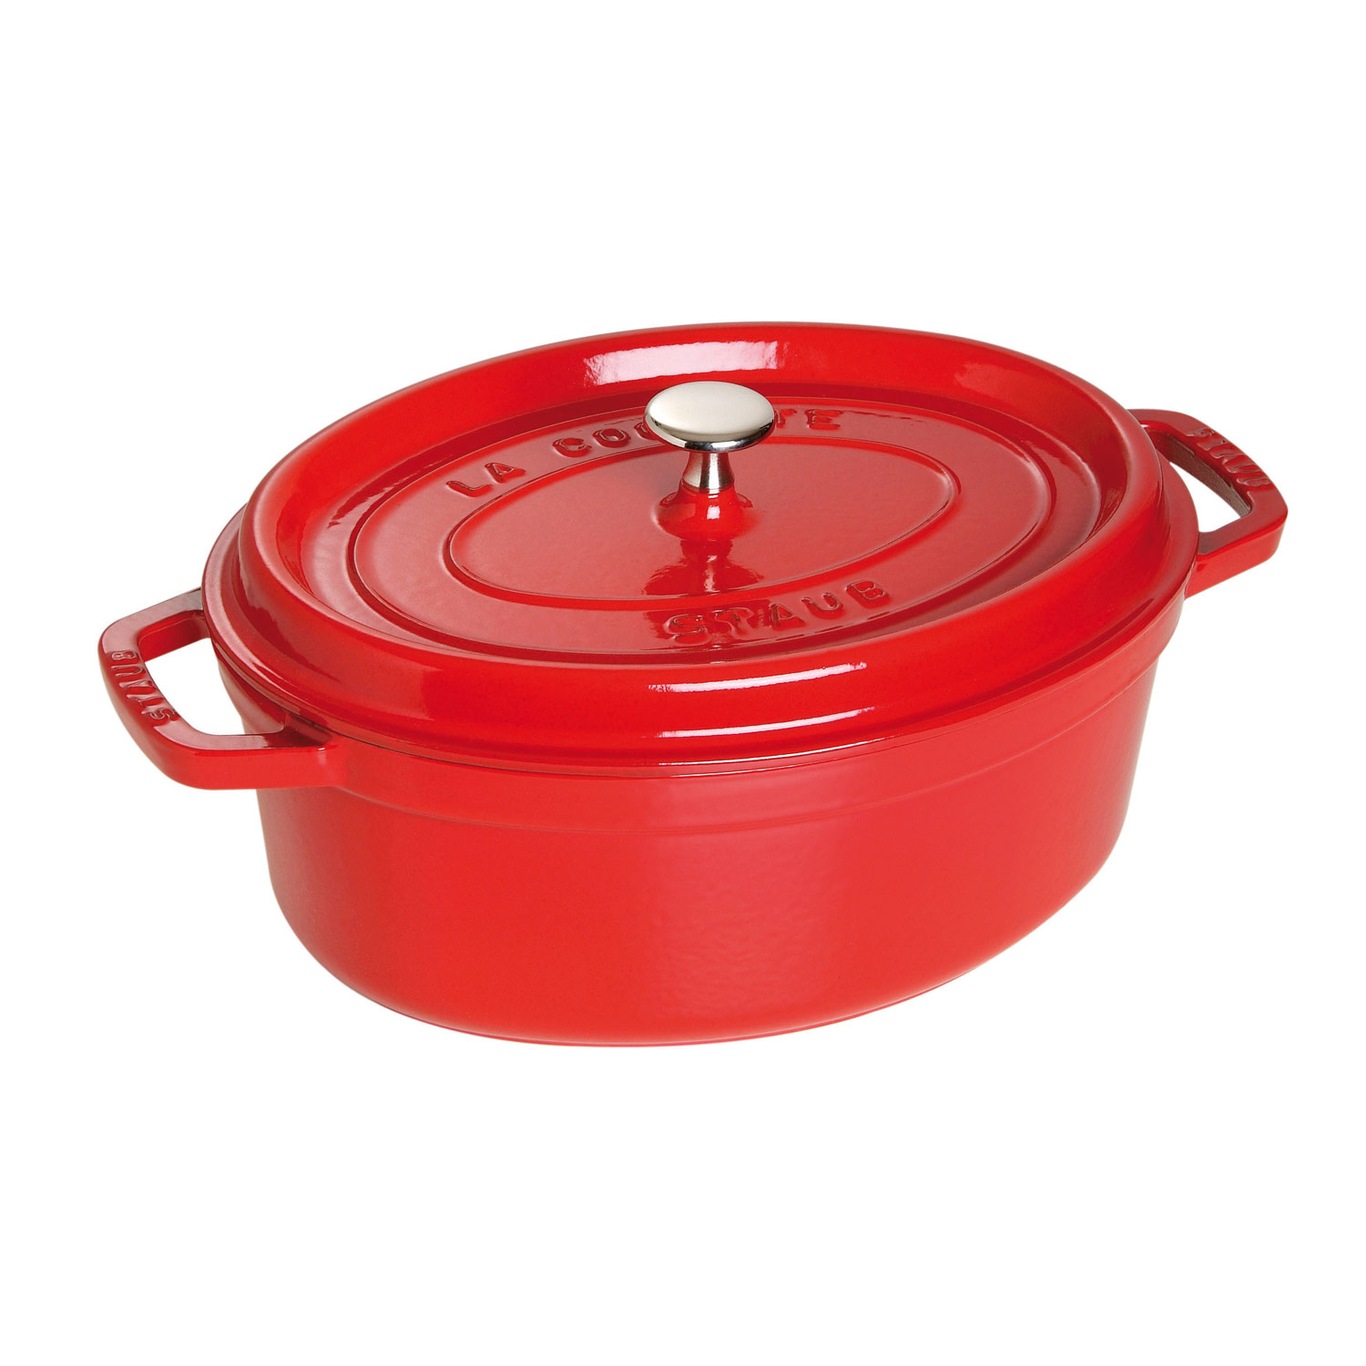 Staub Oval Cocotte 29 cm 4,2 L, Red